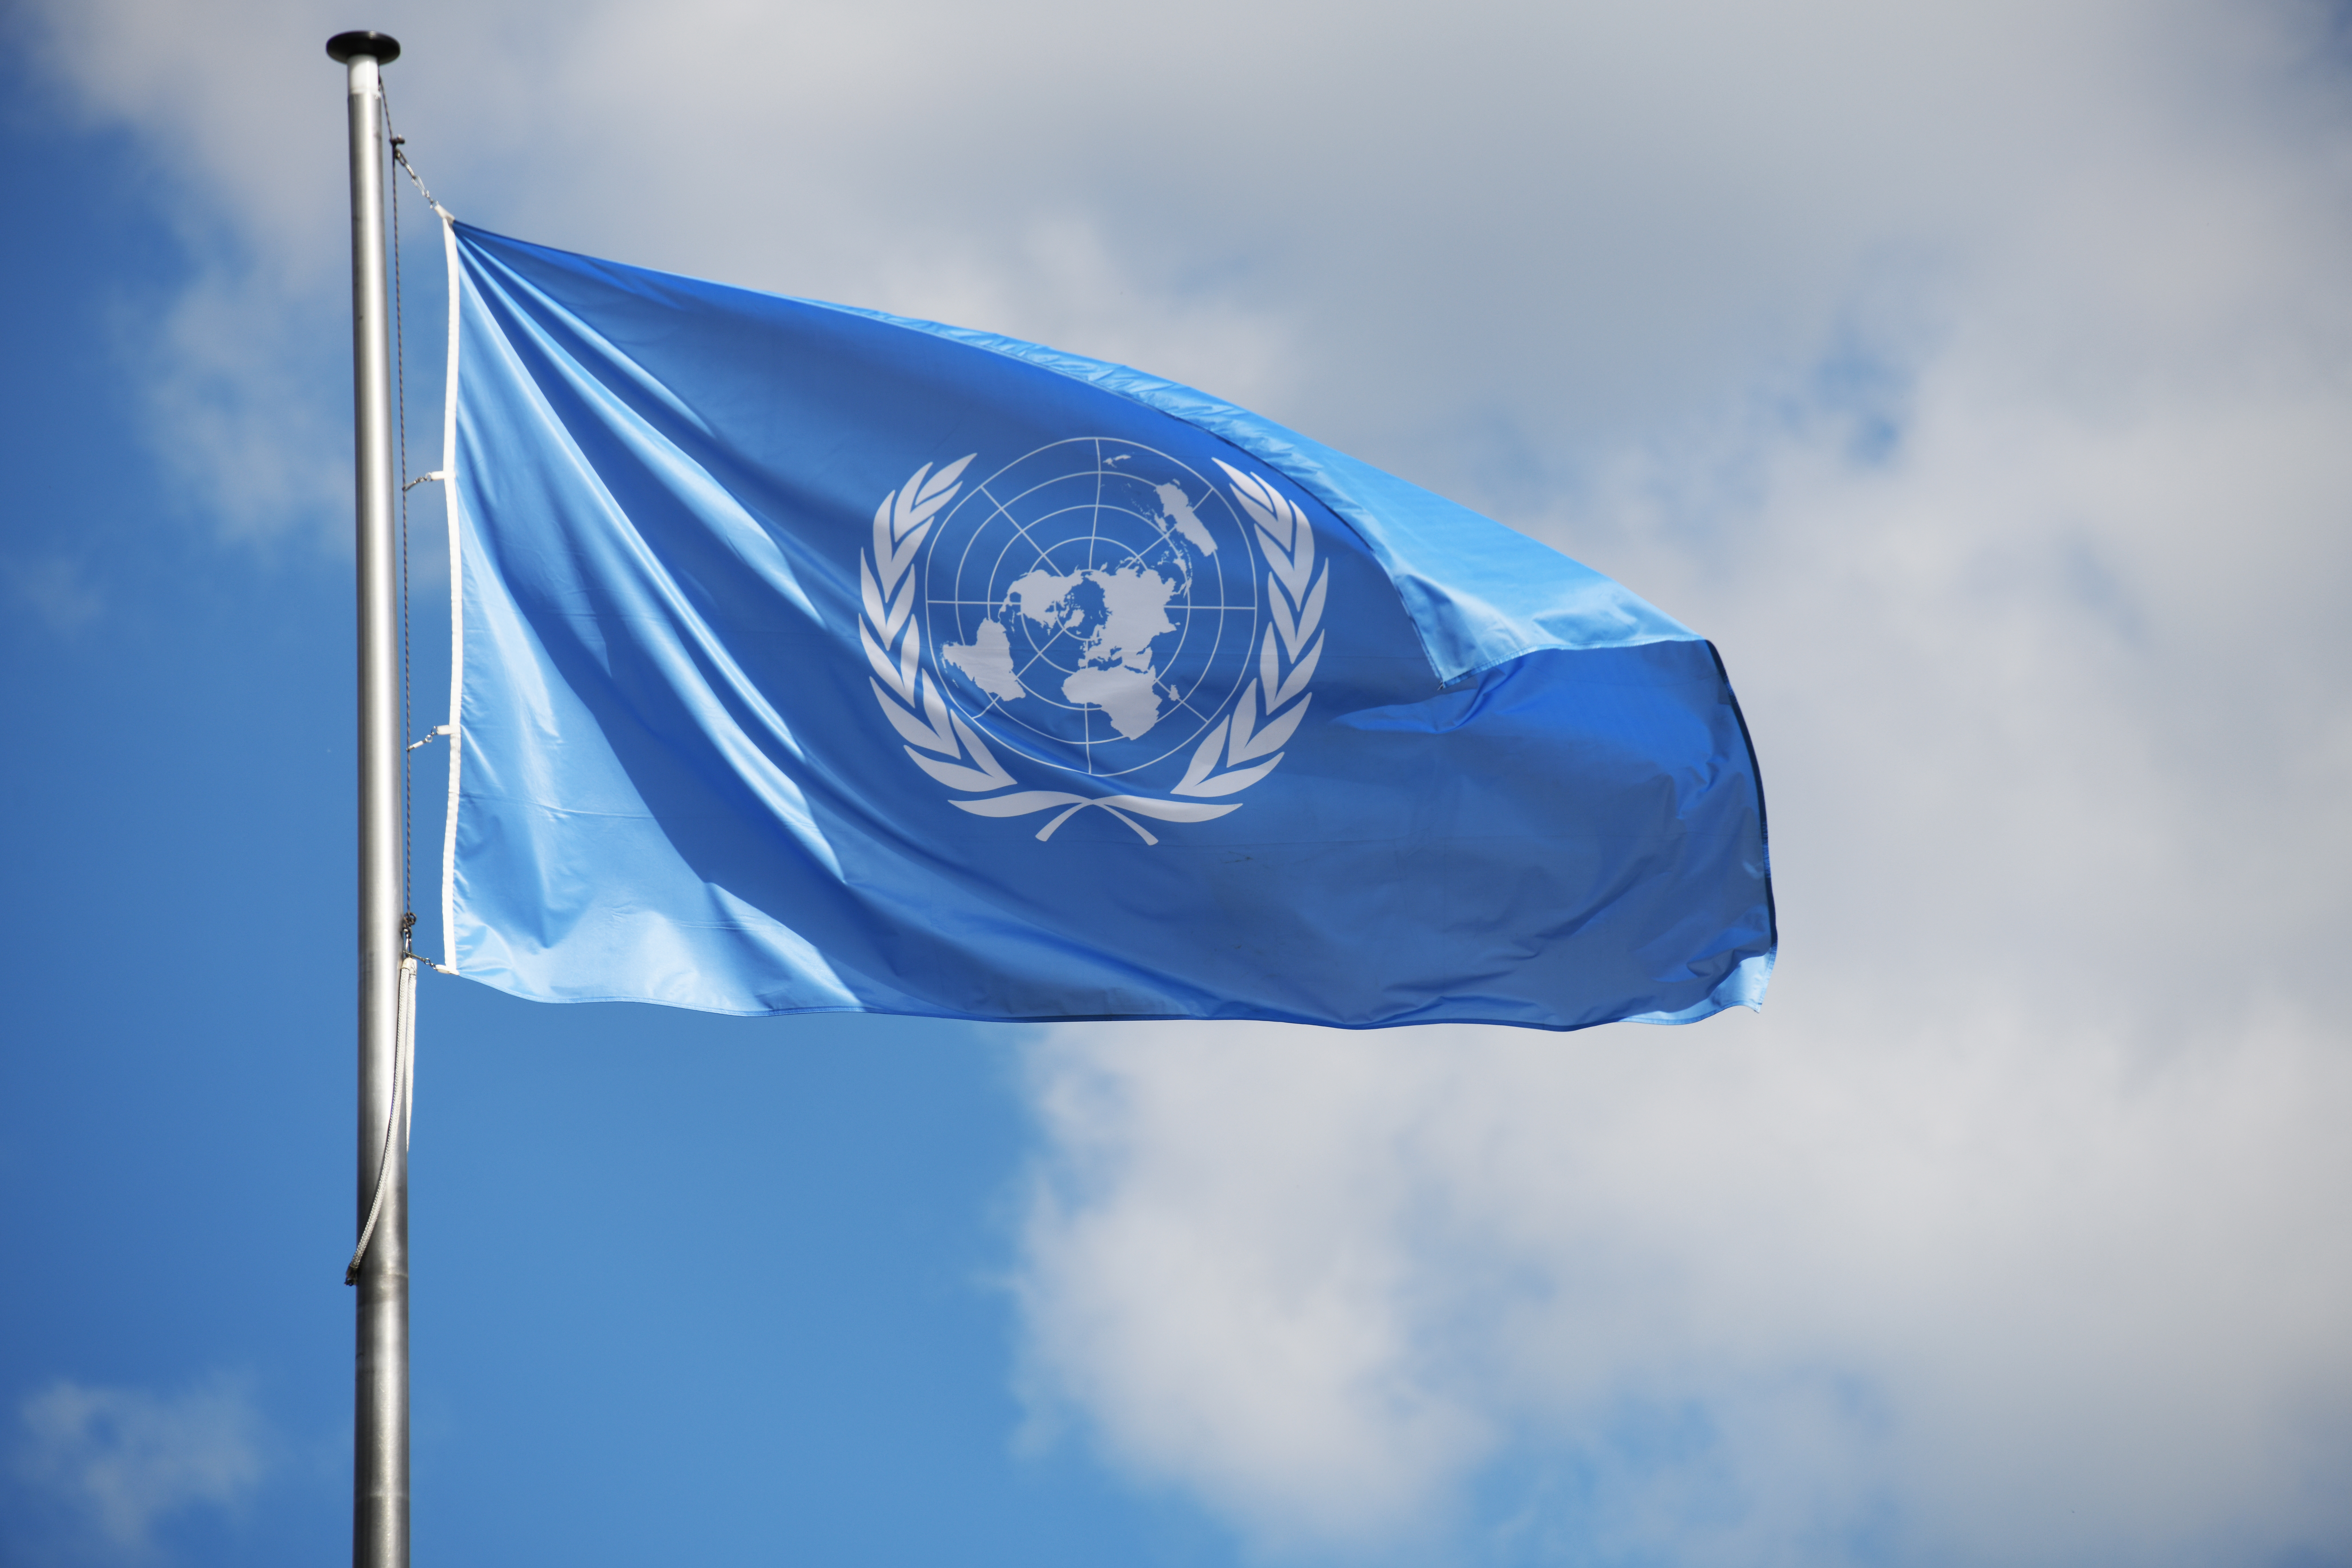 Blue UN Flag flaps against a backdrop of blue sky and clouds.